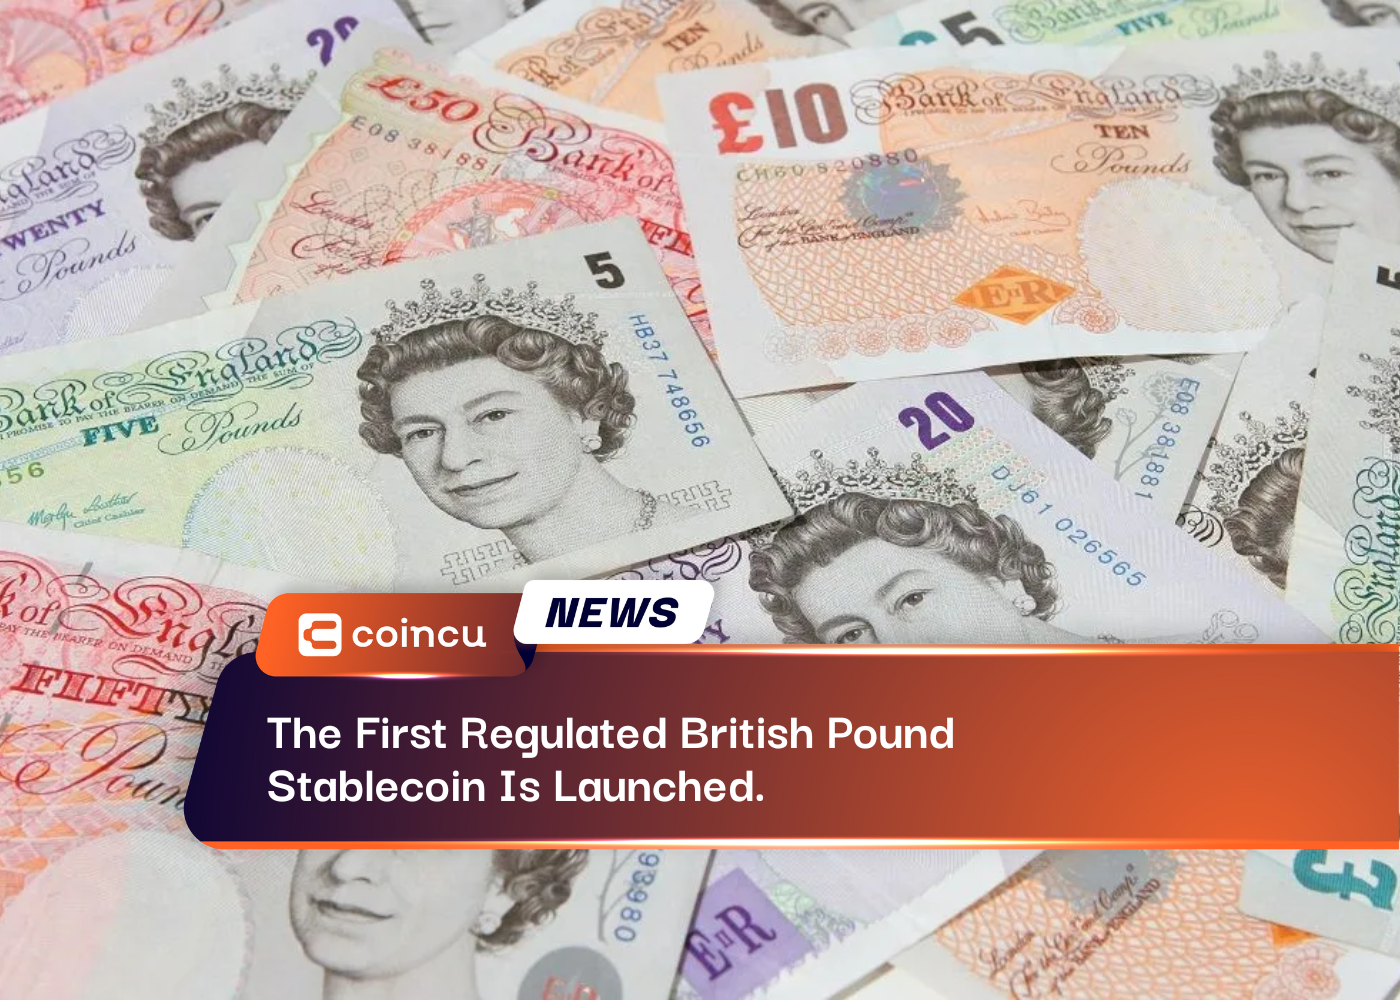 The First Regulated British Pound Stablecoin Is Launched.